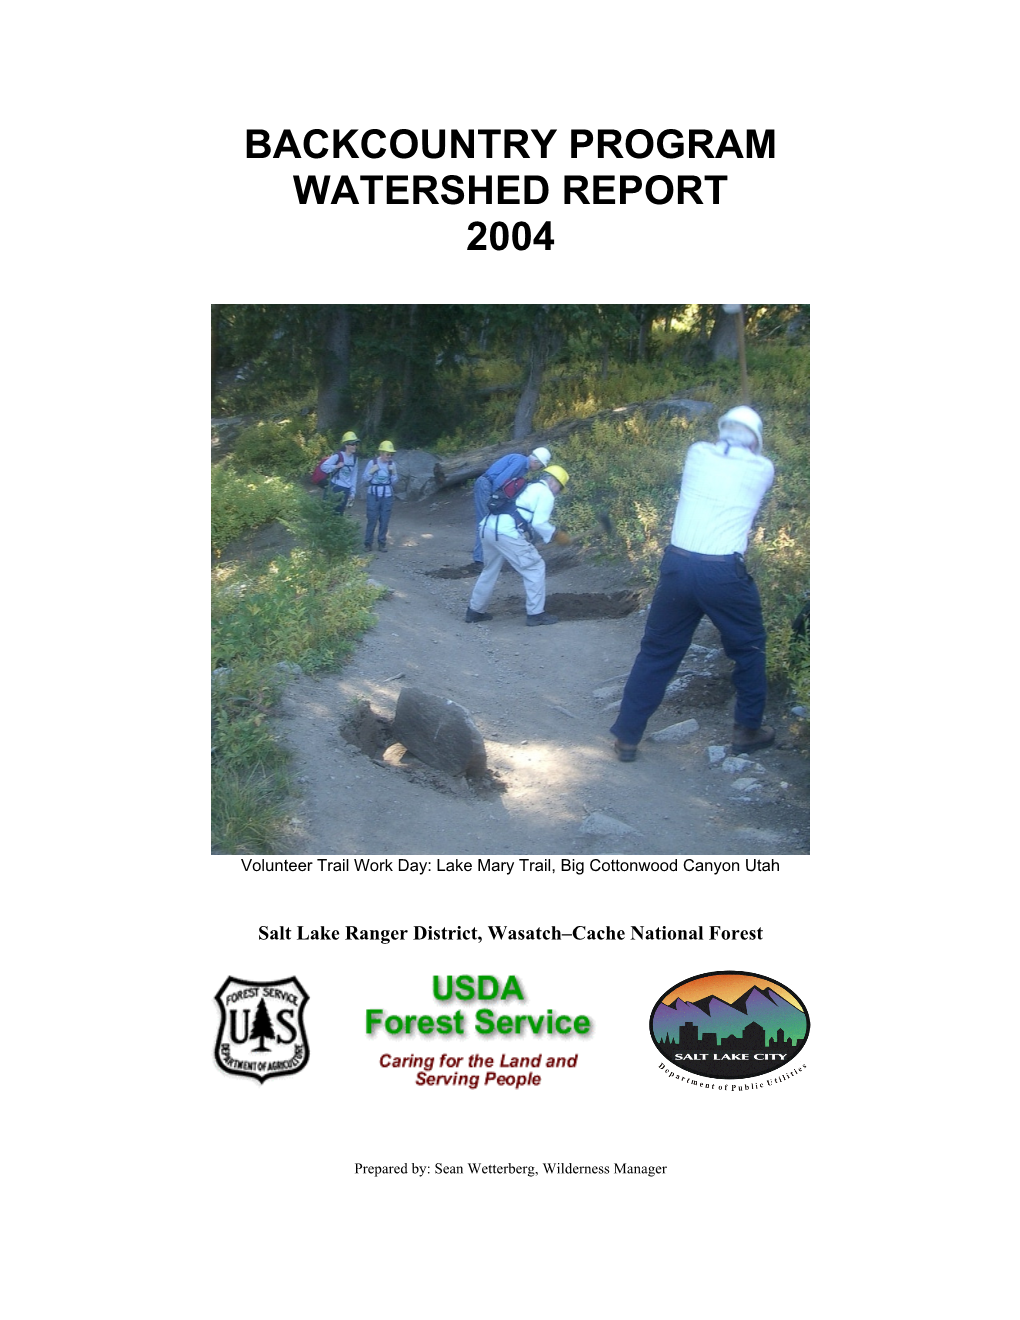 Backcountry Program Watershed Report 2004